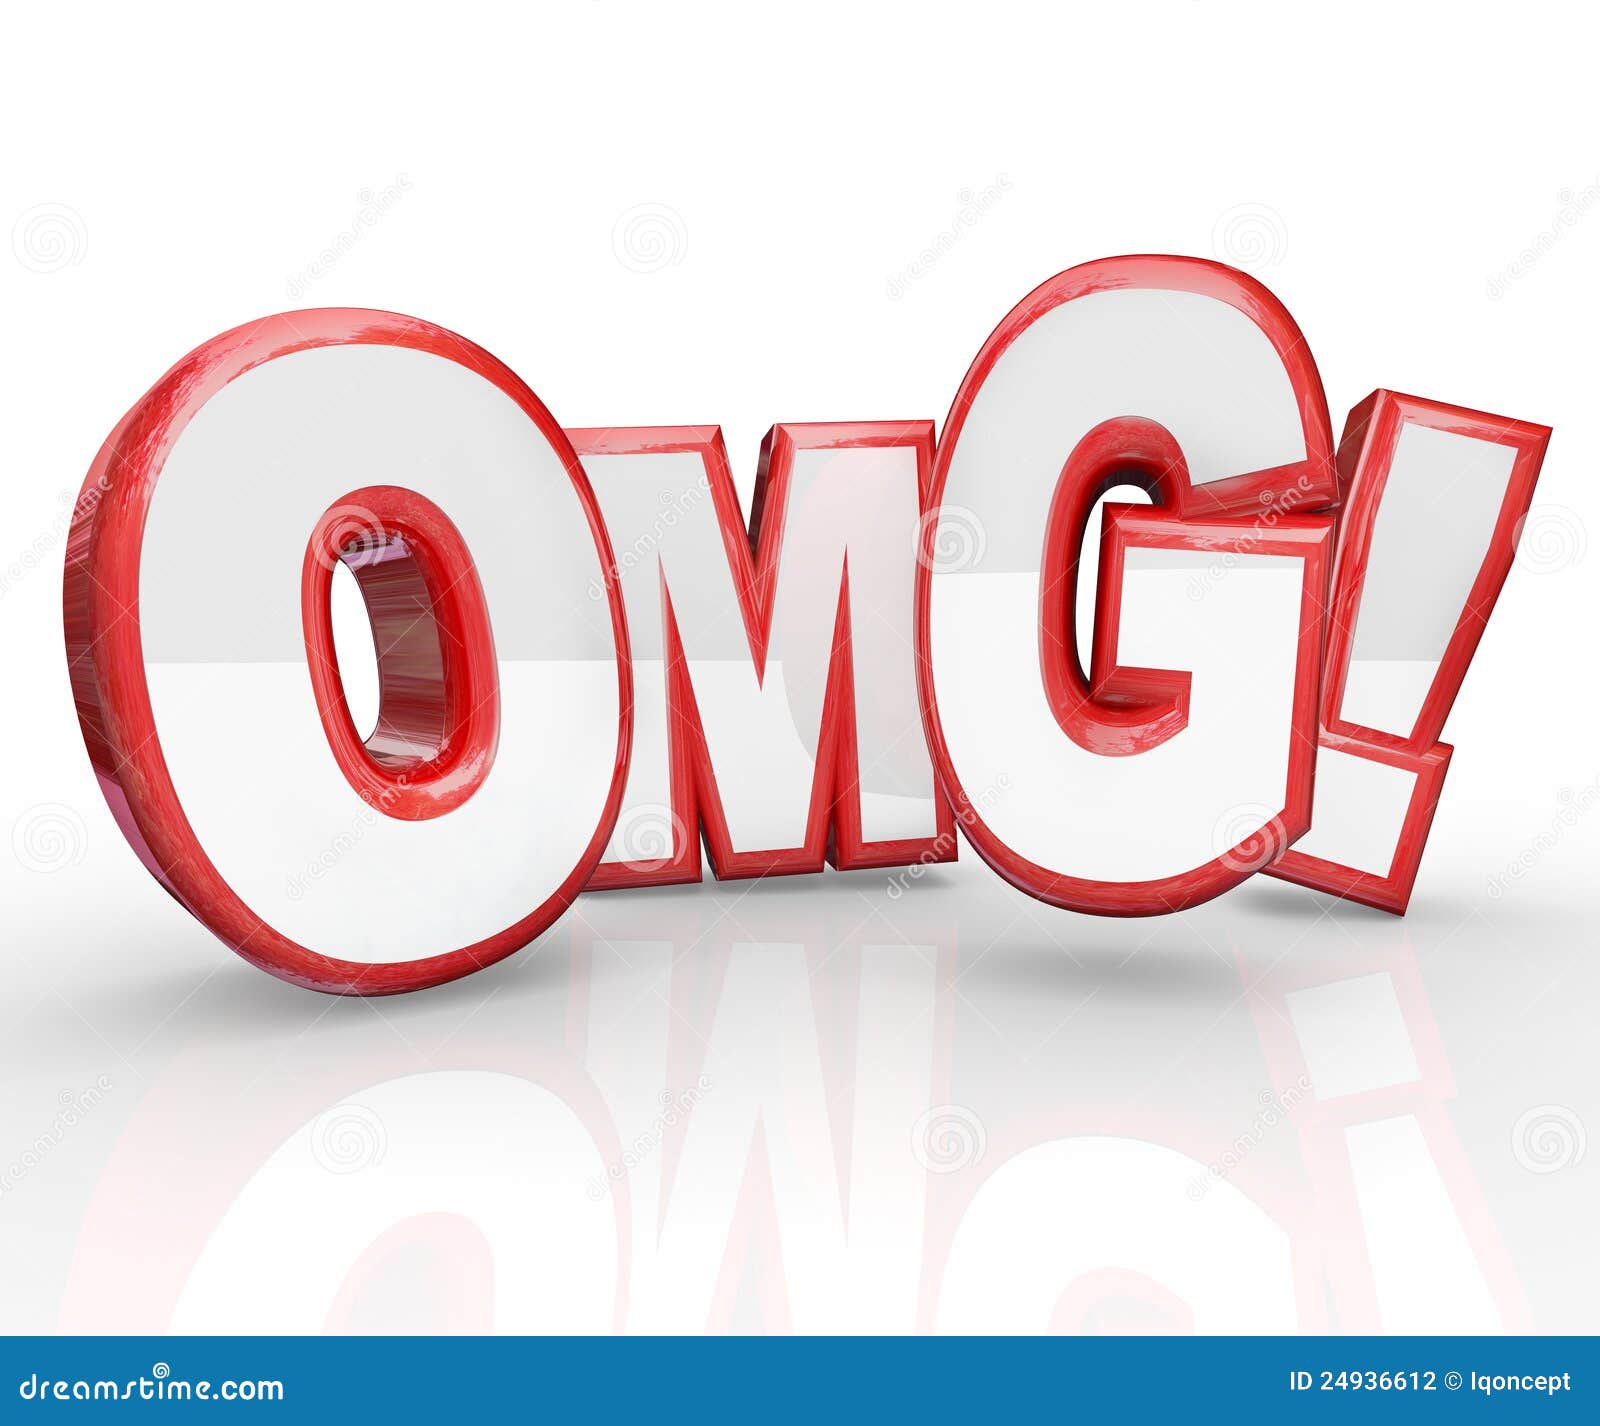 omg-red-3d-letters-oh-my-god-shocked-amazement-24936612.jpg